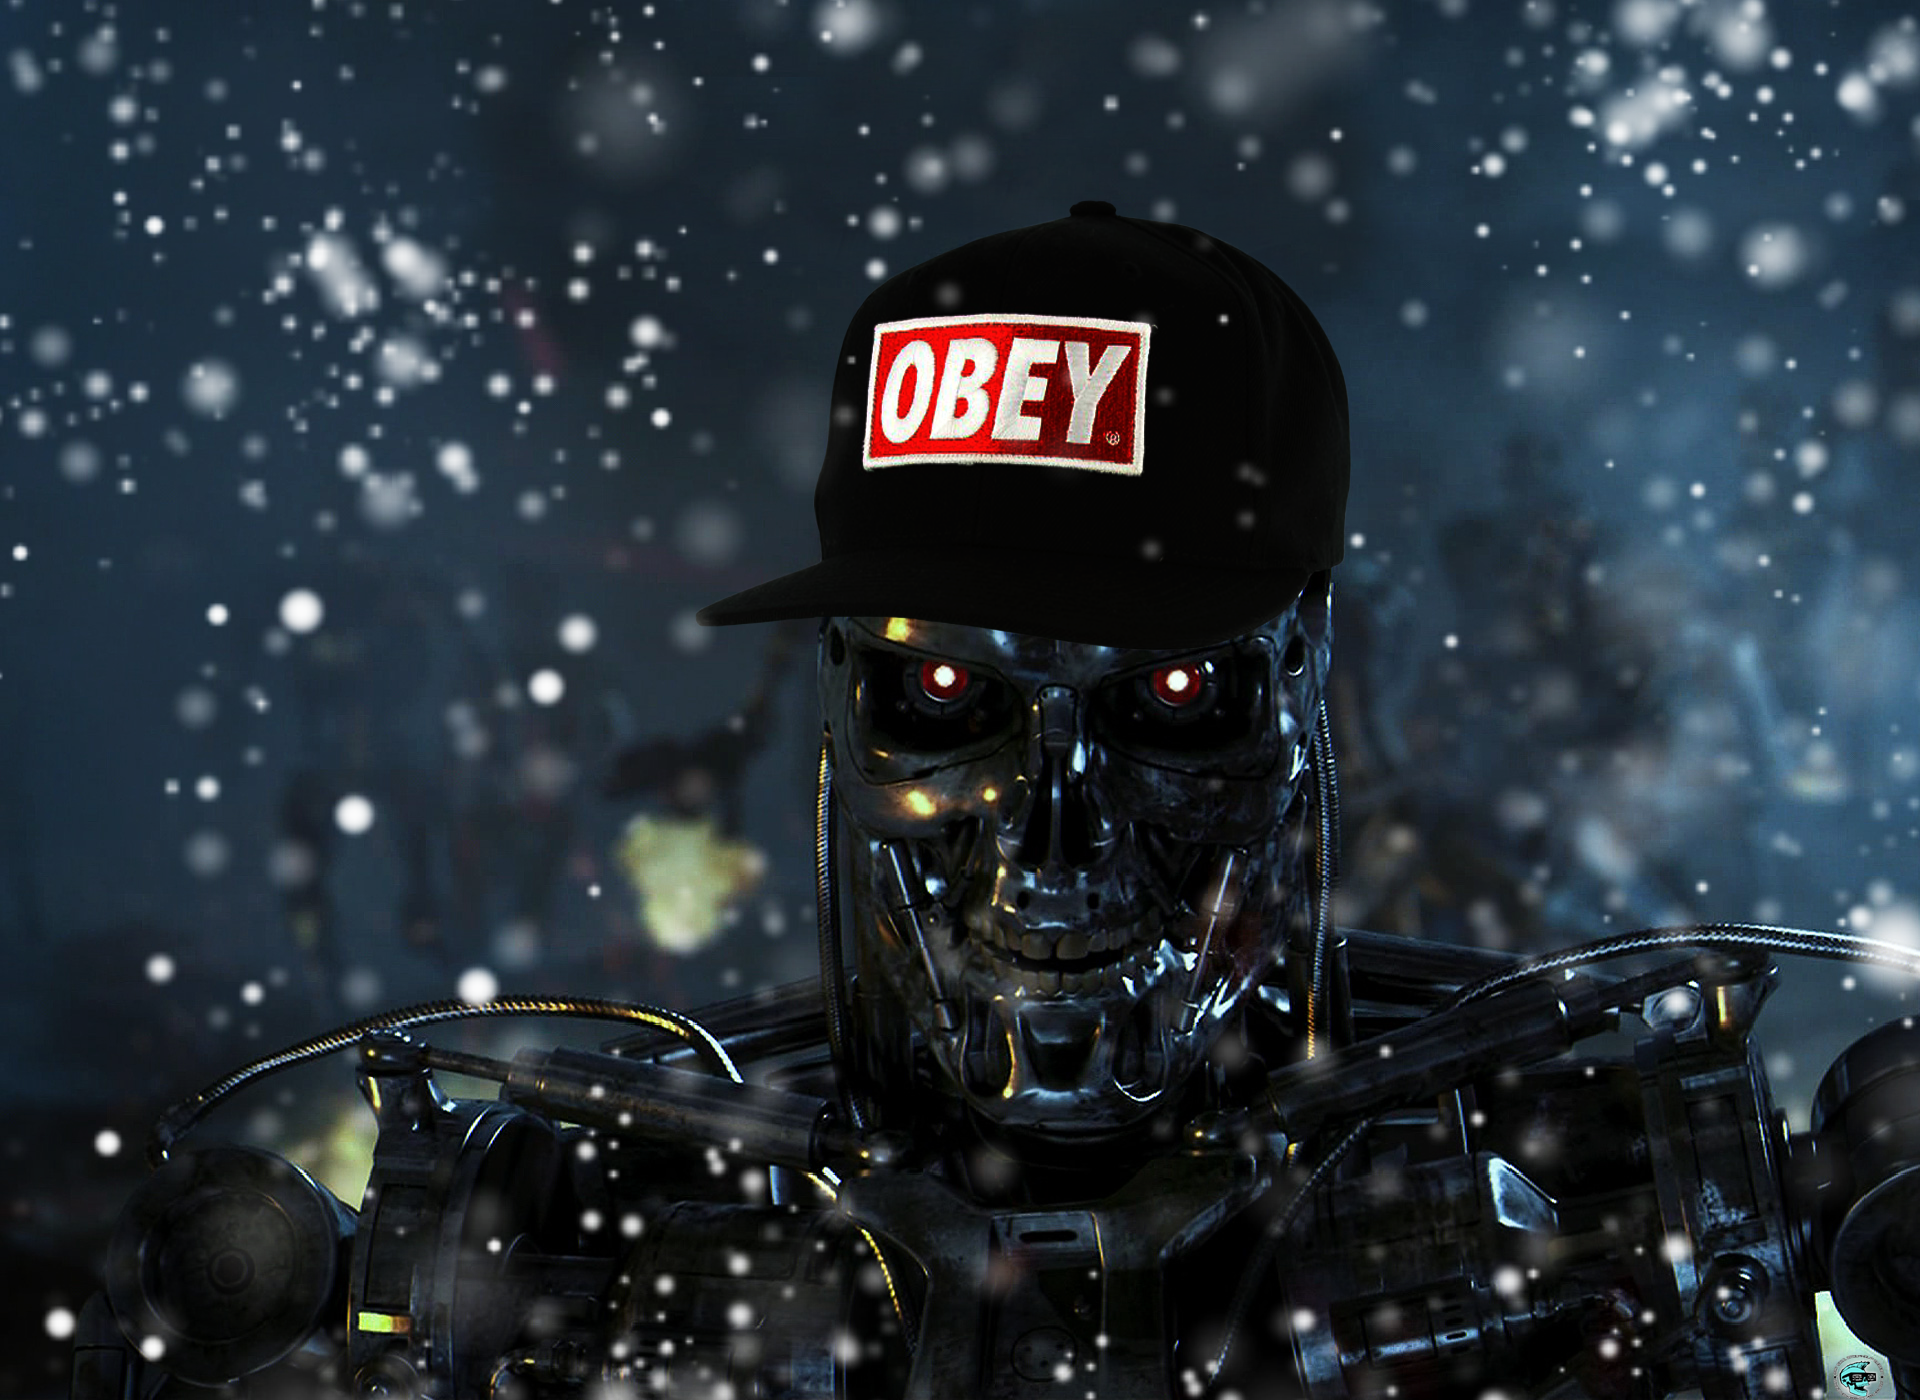 Obey Wallpaper High Quality